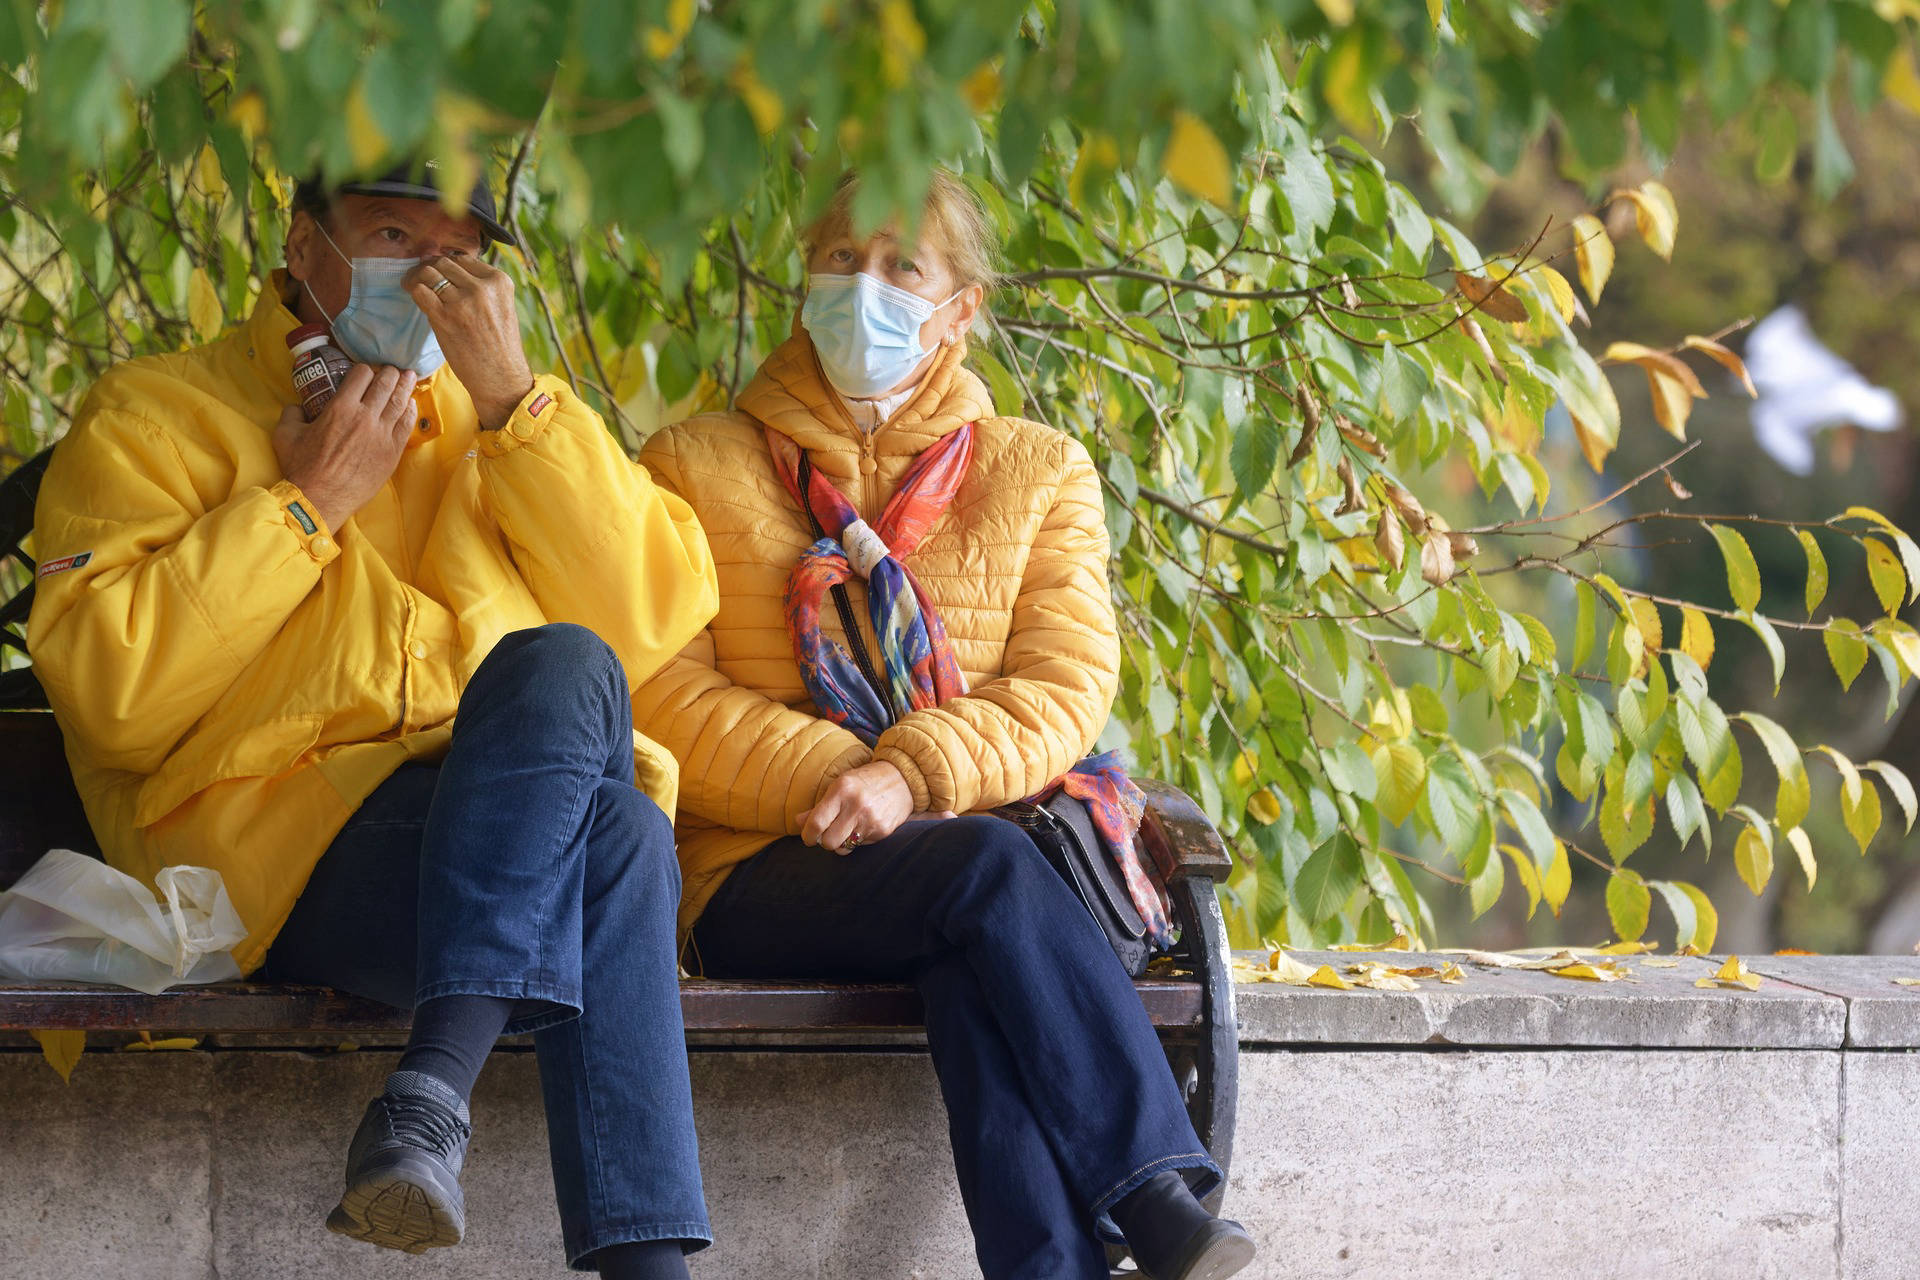 Two people sitting on a bench wearing yellow coats and blue face masks.